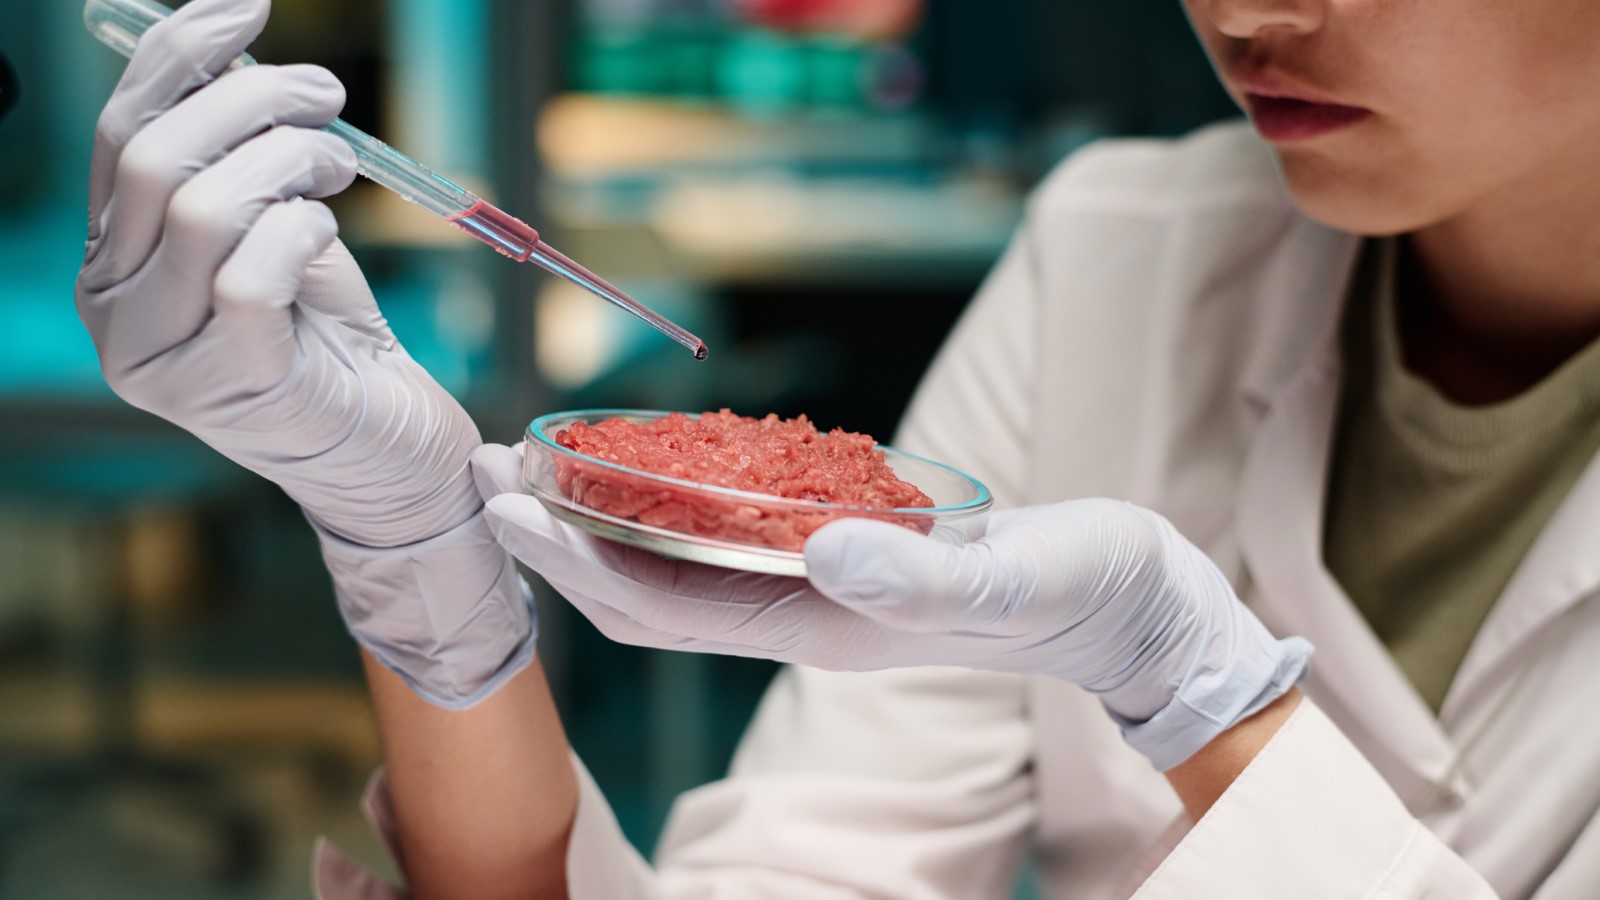 <p><span>Lab-grown food has been a staple of science fiction for over a century. From the space required to grow plants to the climate-damaging effects of mass-raising cattle, the need for alternatives grows more urgent every year. </span></p><p><span>The race is on to develop artificial meat that tastes like the real thing without the drawbacks, and hundreds of companies are entering the race. Lab-grown </span><i><span>foie gras</span></i><span>, the fattened liver of a duck or goose, is already a reality. Scientists are also working hard to develop alternatives for sushi fish.</span></p>